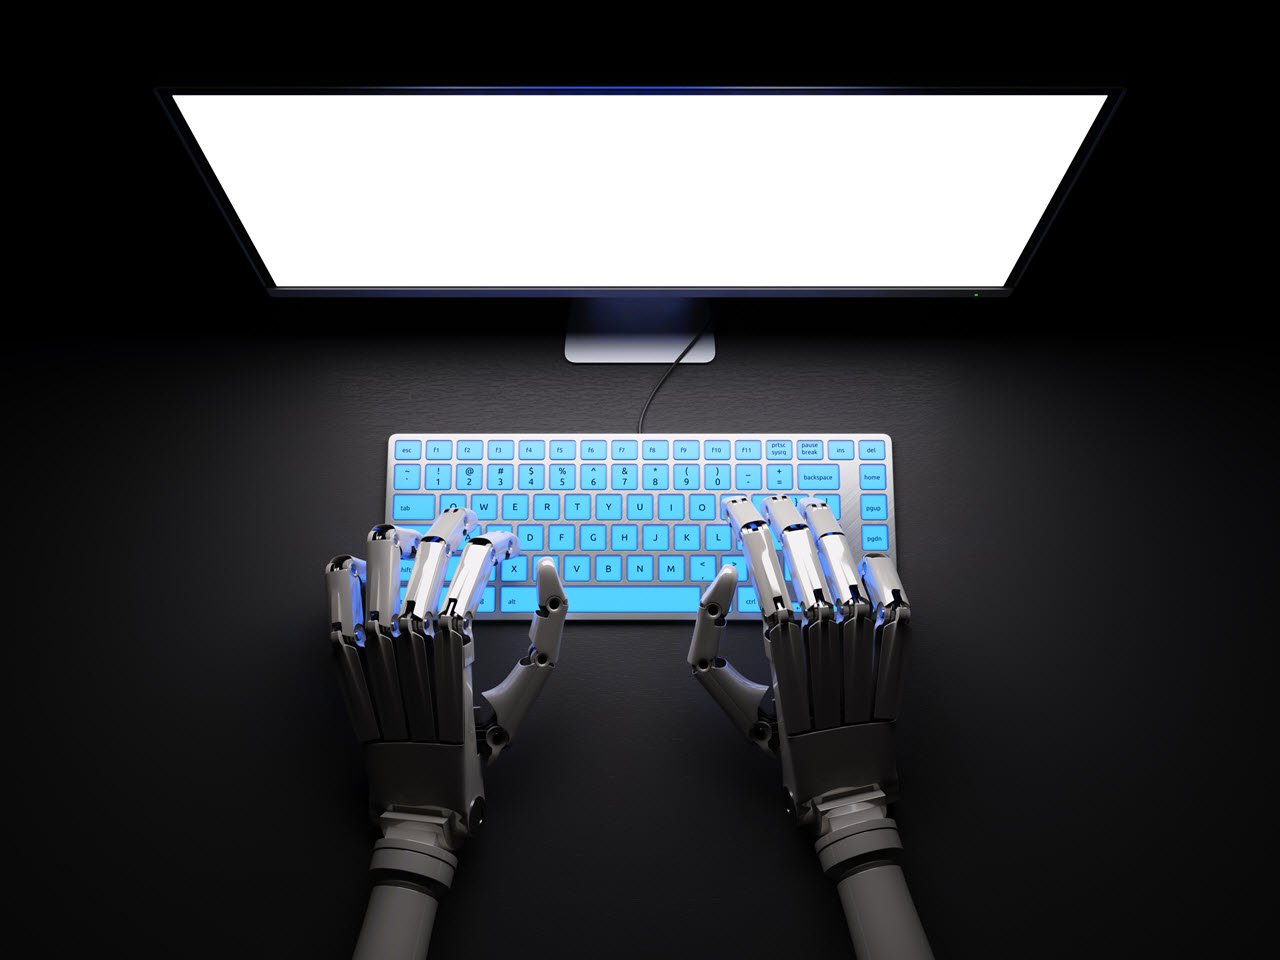 Concept art of robotic hands typing on a backlit keyboard.